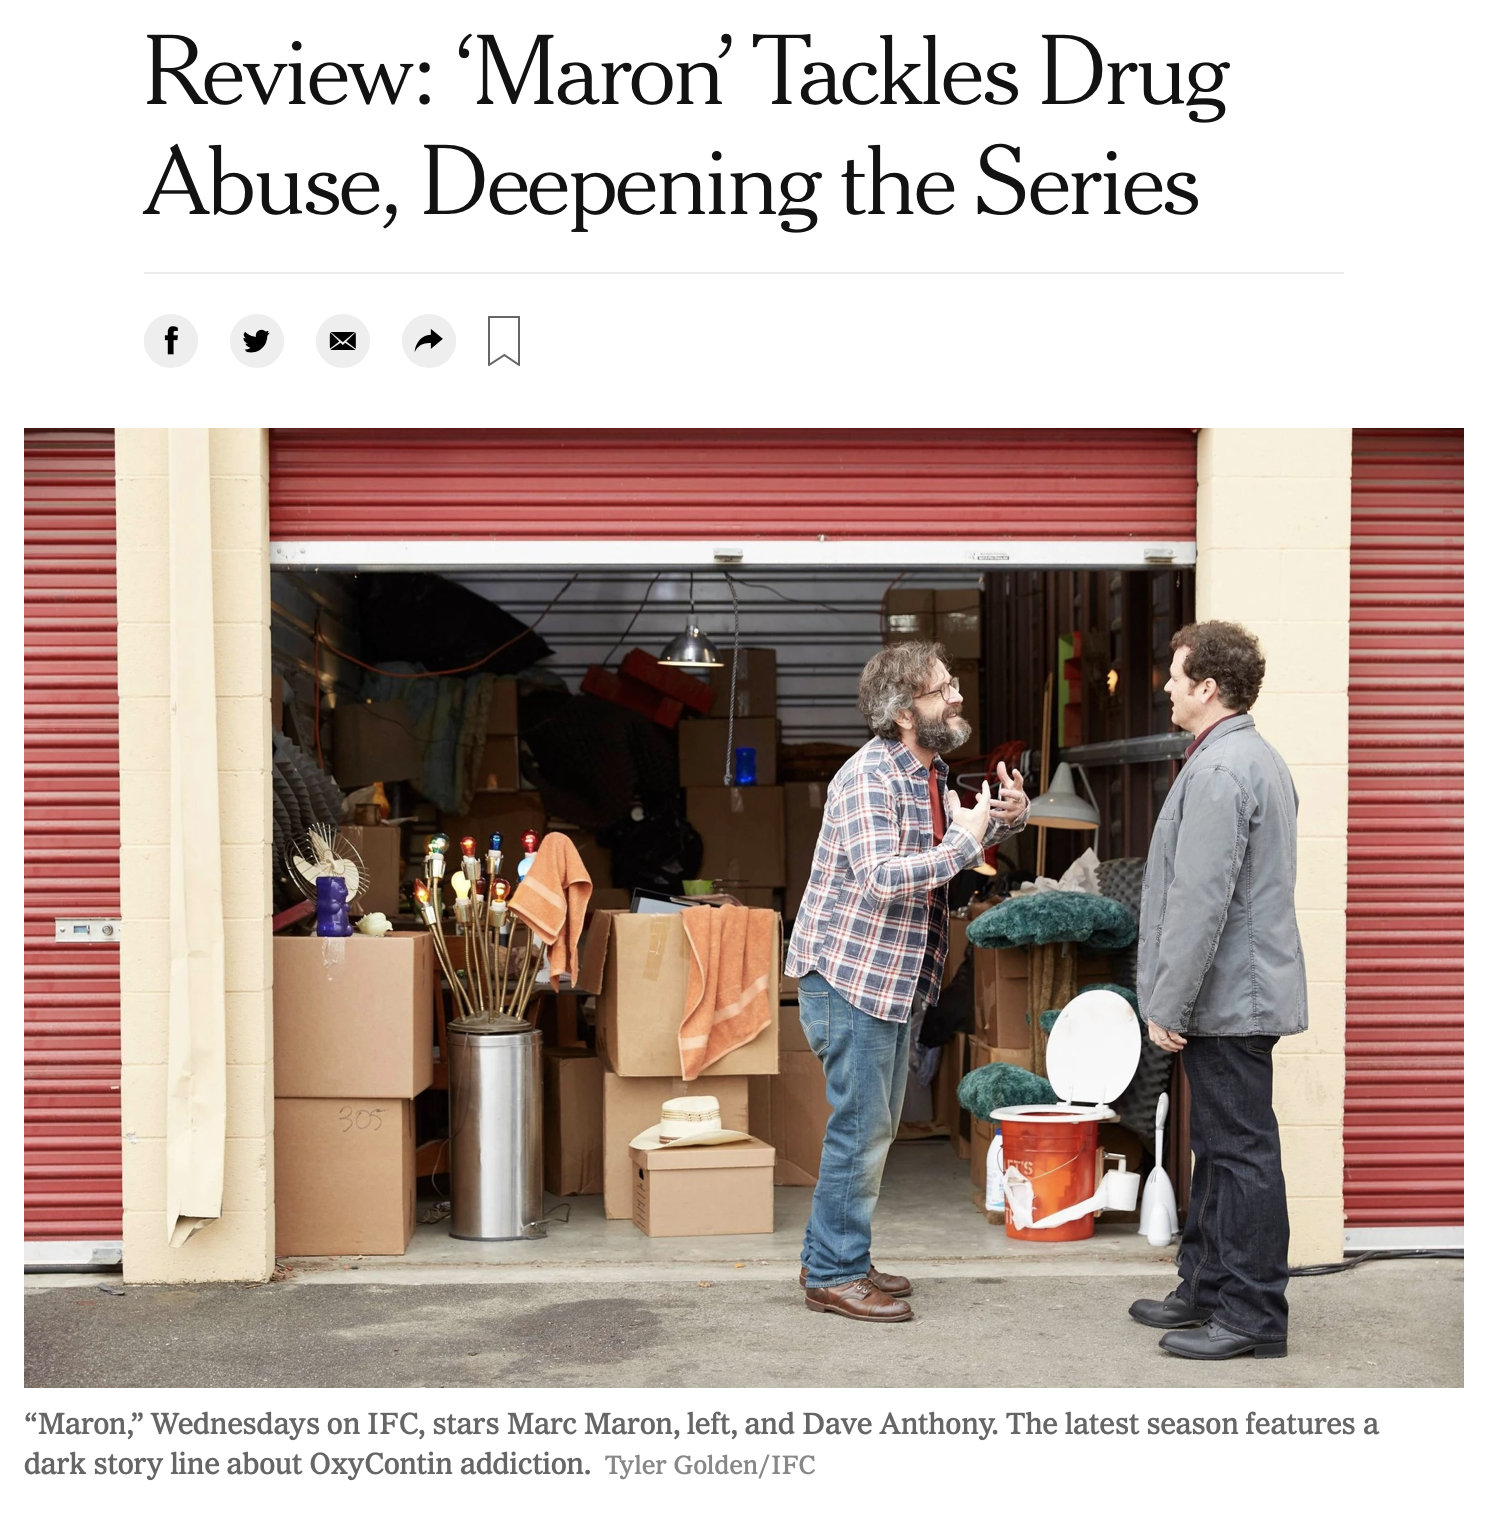   https://www.nytimes.com/2016/05/04/arts/television/review-maron-tackles-drug-abuse-deepening-the-series.html  